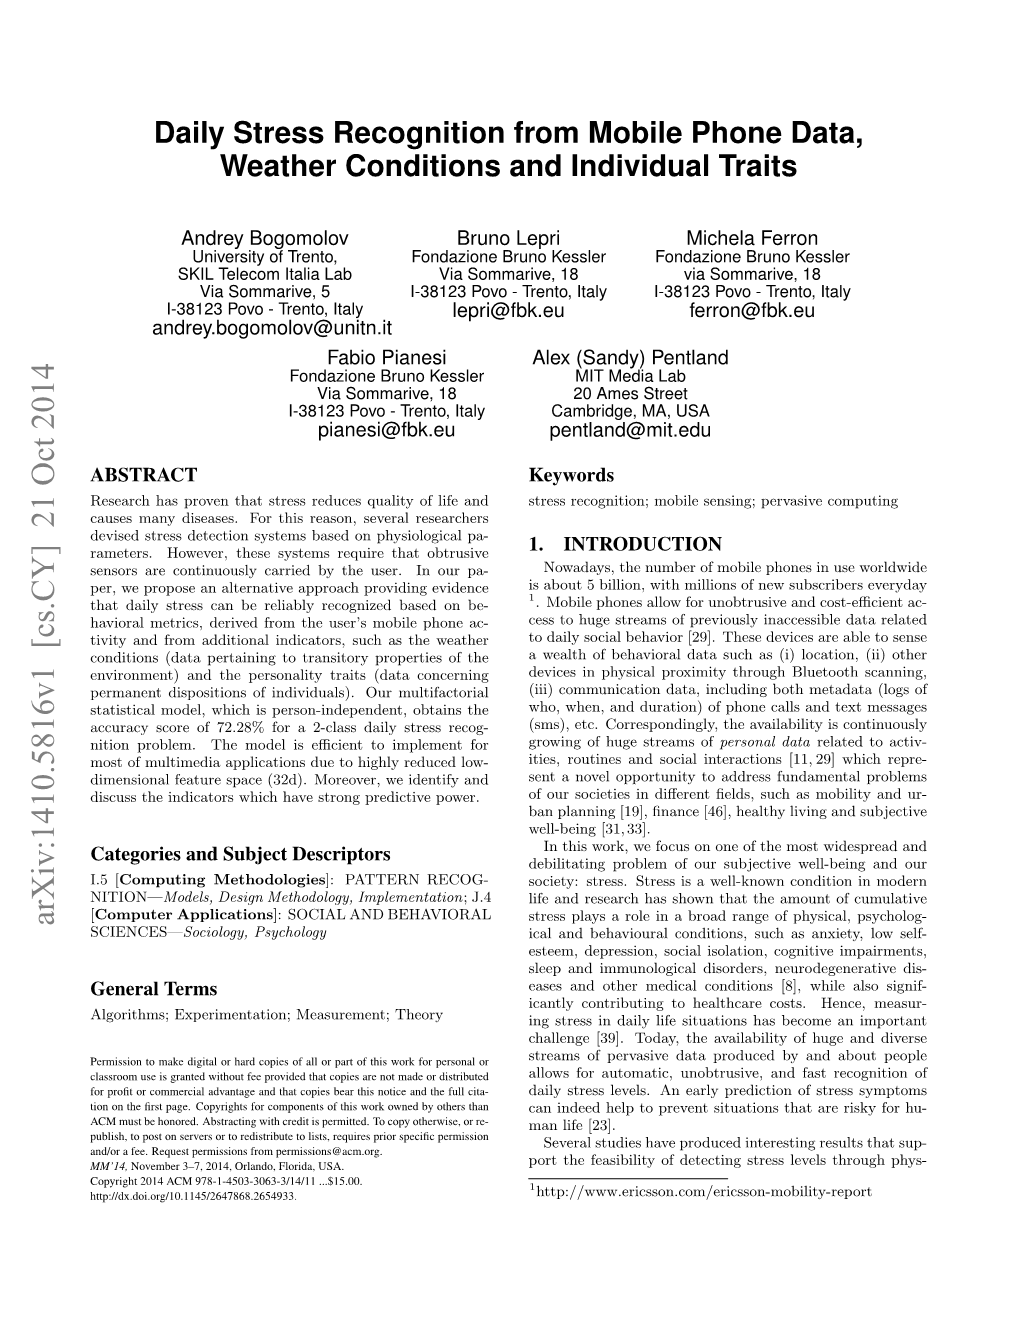 Daily Stress Recognition from Mobile Phone Data, Weather Conditions and Individual Traits